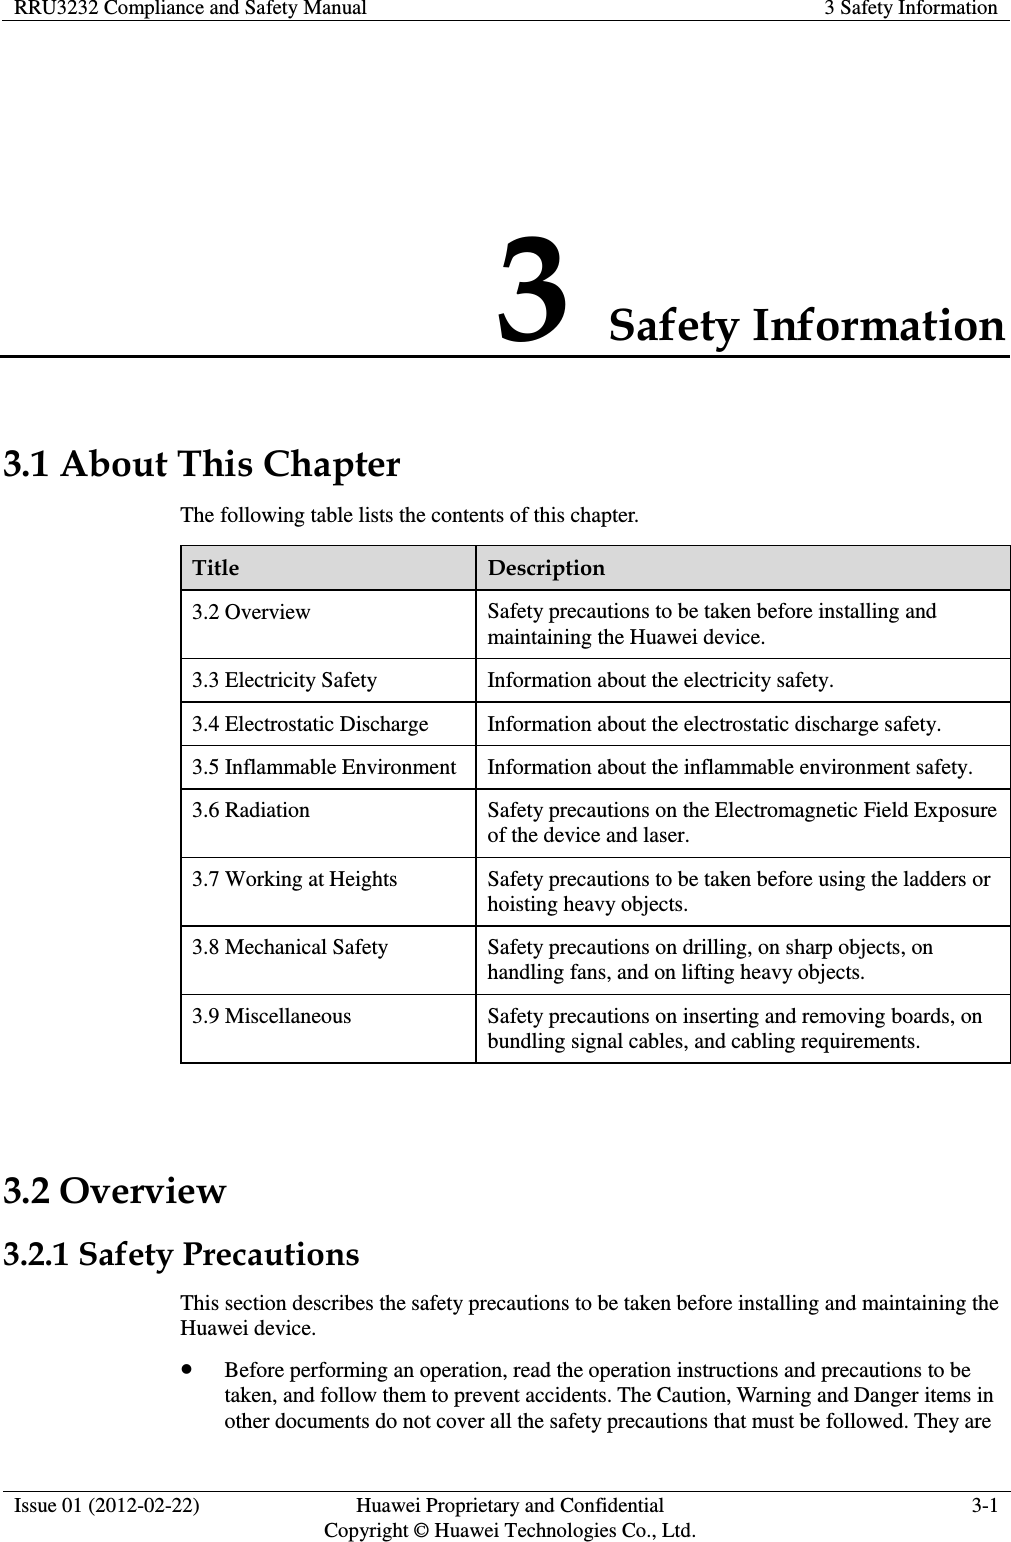 RRU3232 Compliance and Safety Manual 3 Safety Information  Issue 01 (2012-02-22) Huawei Proprietary and Confidential         Copyright © Huawei Technologies Co., Ltd. 3-1  3 Safety Information 3.1 About This Chapter The following table lists the contents of this chapter. Title Description 3.2 Overview Safety precautions to be taken before installing and maintaining the Huawei device. 3.3 Electricity Safety Information about the electricity safety. 3.4 Electrostatic Discharge Information about the electrostatic discharge safety. 3.5 Inflammable Environment Information about the inflammable environment safety. 3.6 Radiation Safety precautions on the Electromagnetic Field Exposure of the device and laser. 3.7 Working at Heights Safety precautions to be taken before using the ladders or hoisting heavy objects. 3.8 Mechanical Safety Safety precautions on drilling, on sharp objects, on handling fans, and on lifting heavy objects. 3.9 Miscellaneous Safety precautions on inserting and removing boards, on bundling signal cables, and cabling requirements.  3.2 Overview 3.2.1 Safety Precautions This section describes the safety precautions to be taken before installing and maintaining the Huawei device.  Before performing an operation, read the operation instructions and precautions to be taken, and follow them to prevent accidents. The Caution, Warning and Danger items in other documents do not cover all the safety precautions that must be followed. They are 